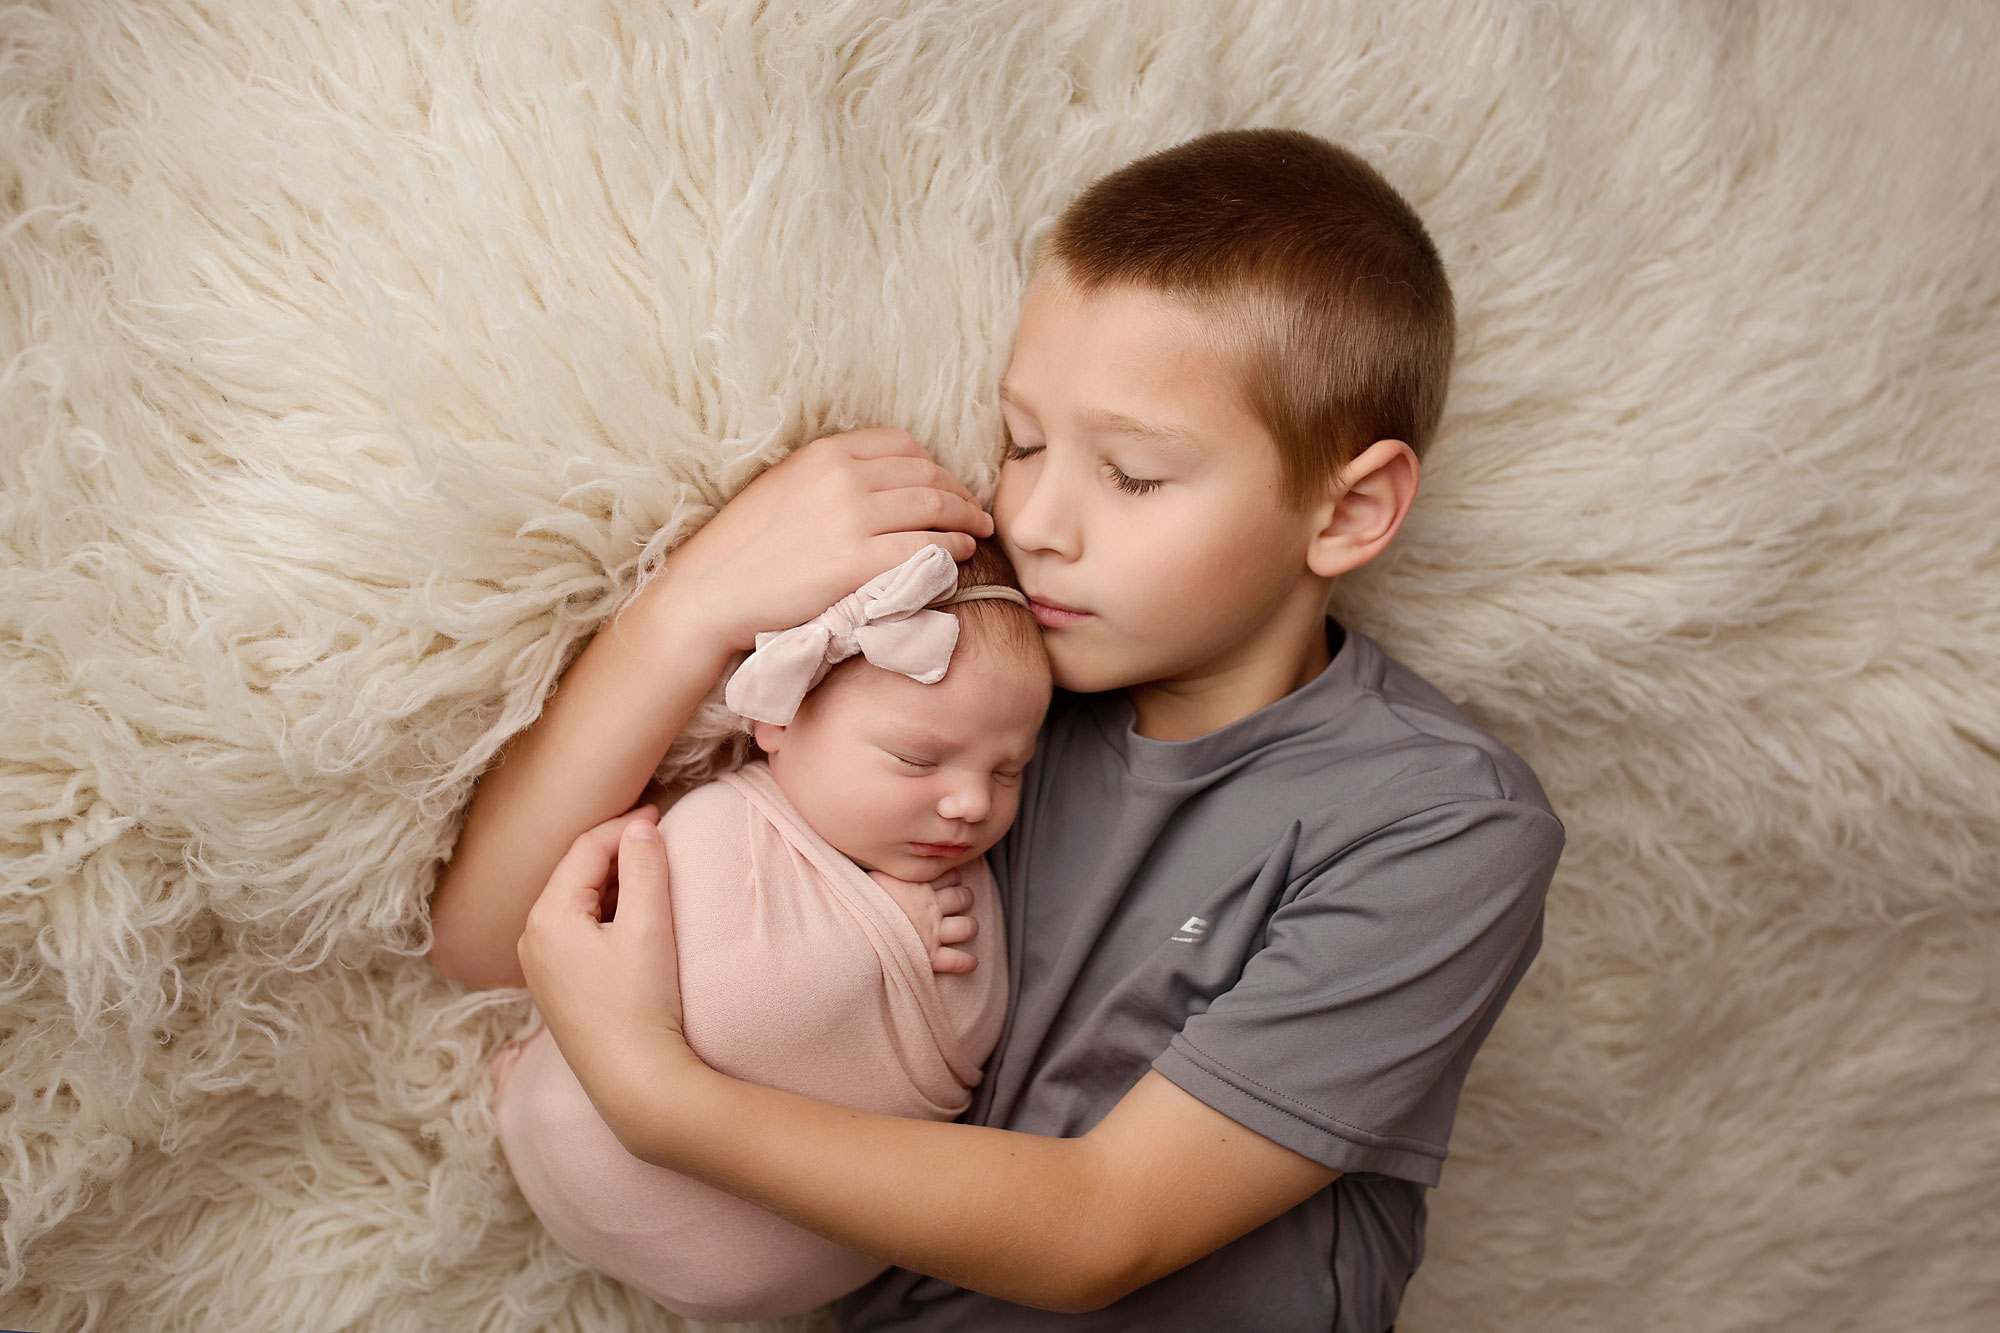 baby and child photographer near me nj, young boy lying on fur rug and snuggling infant sister